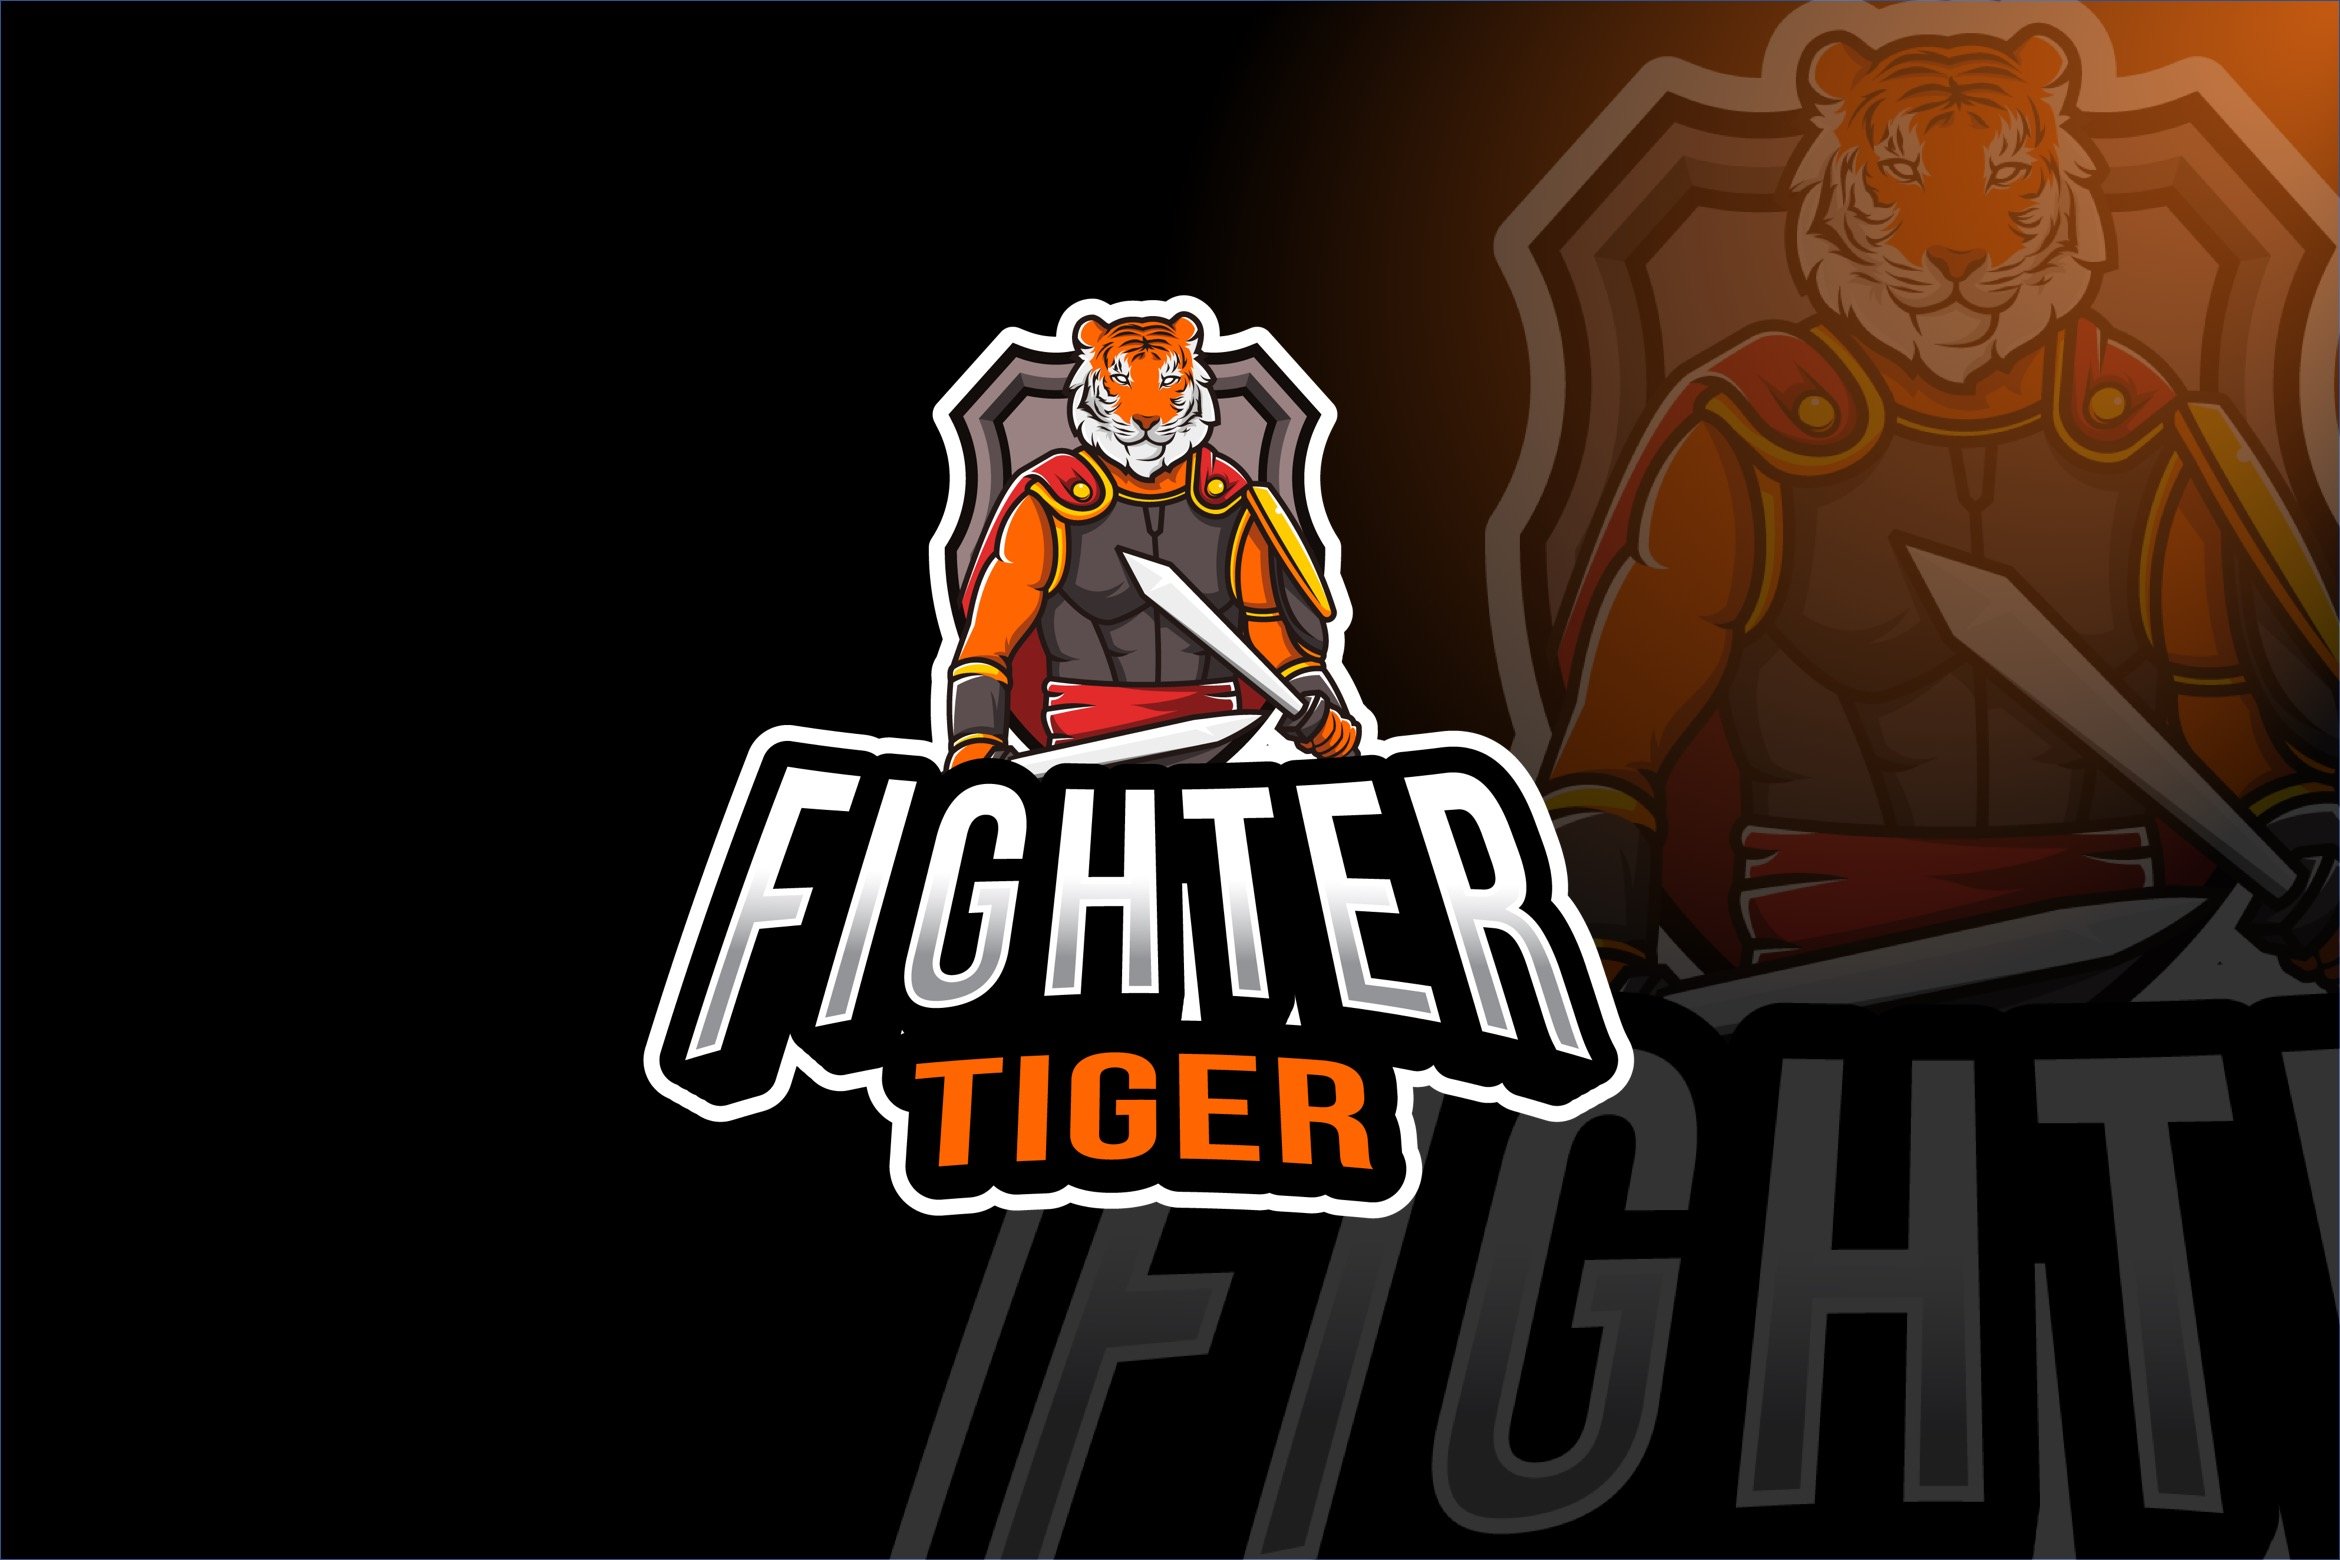 Fighter Tiger Esport Logo Template cover image.